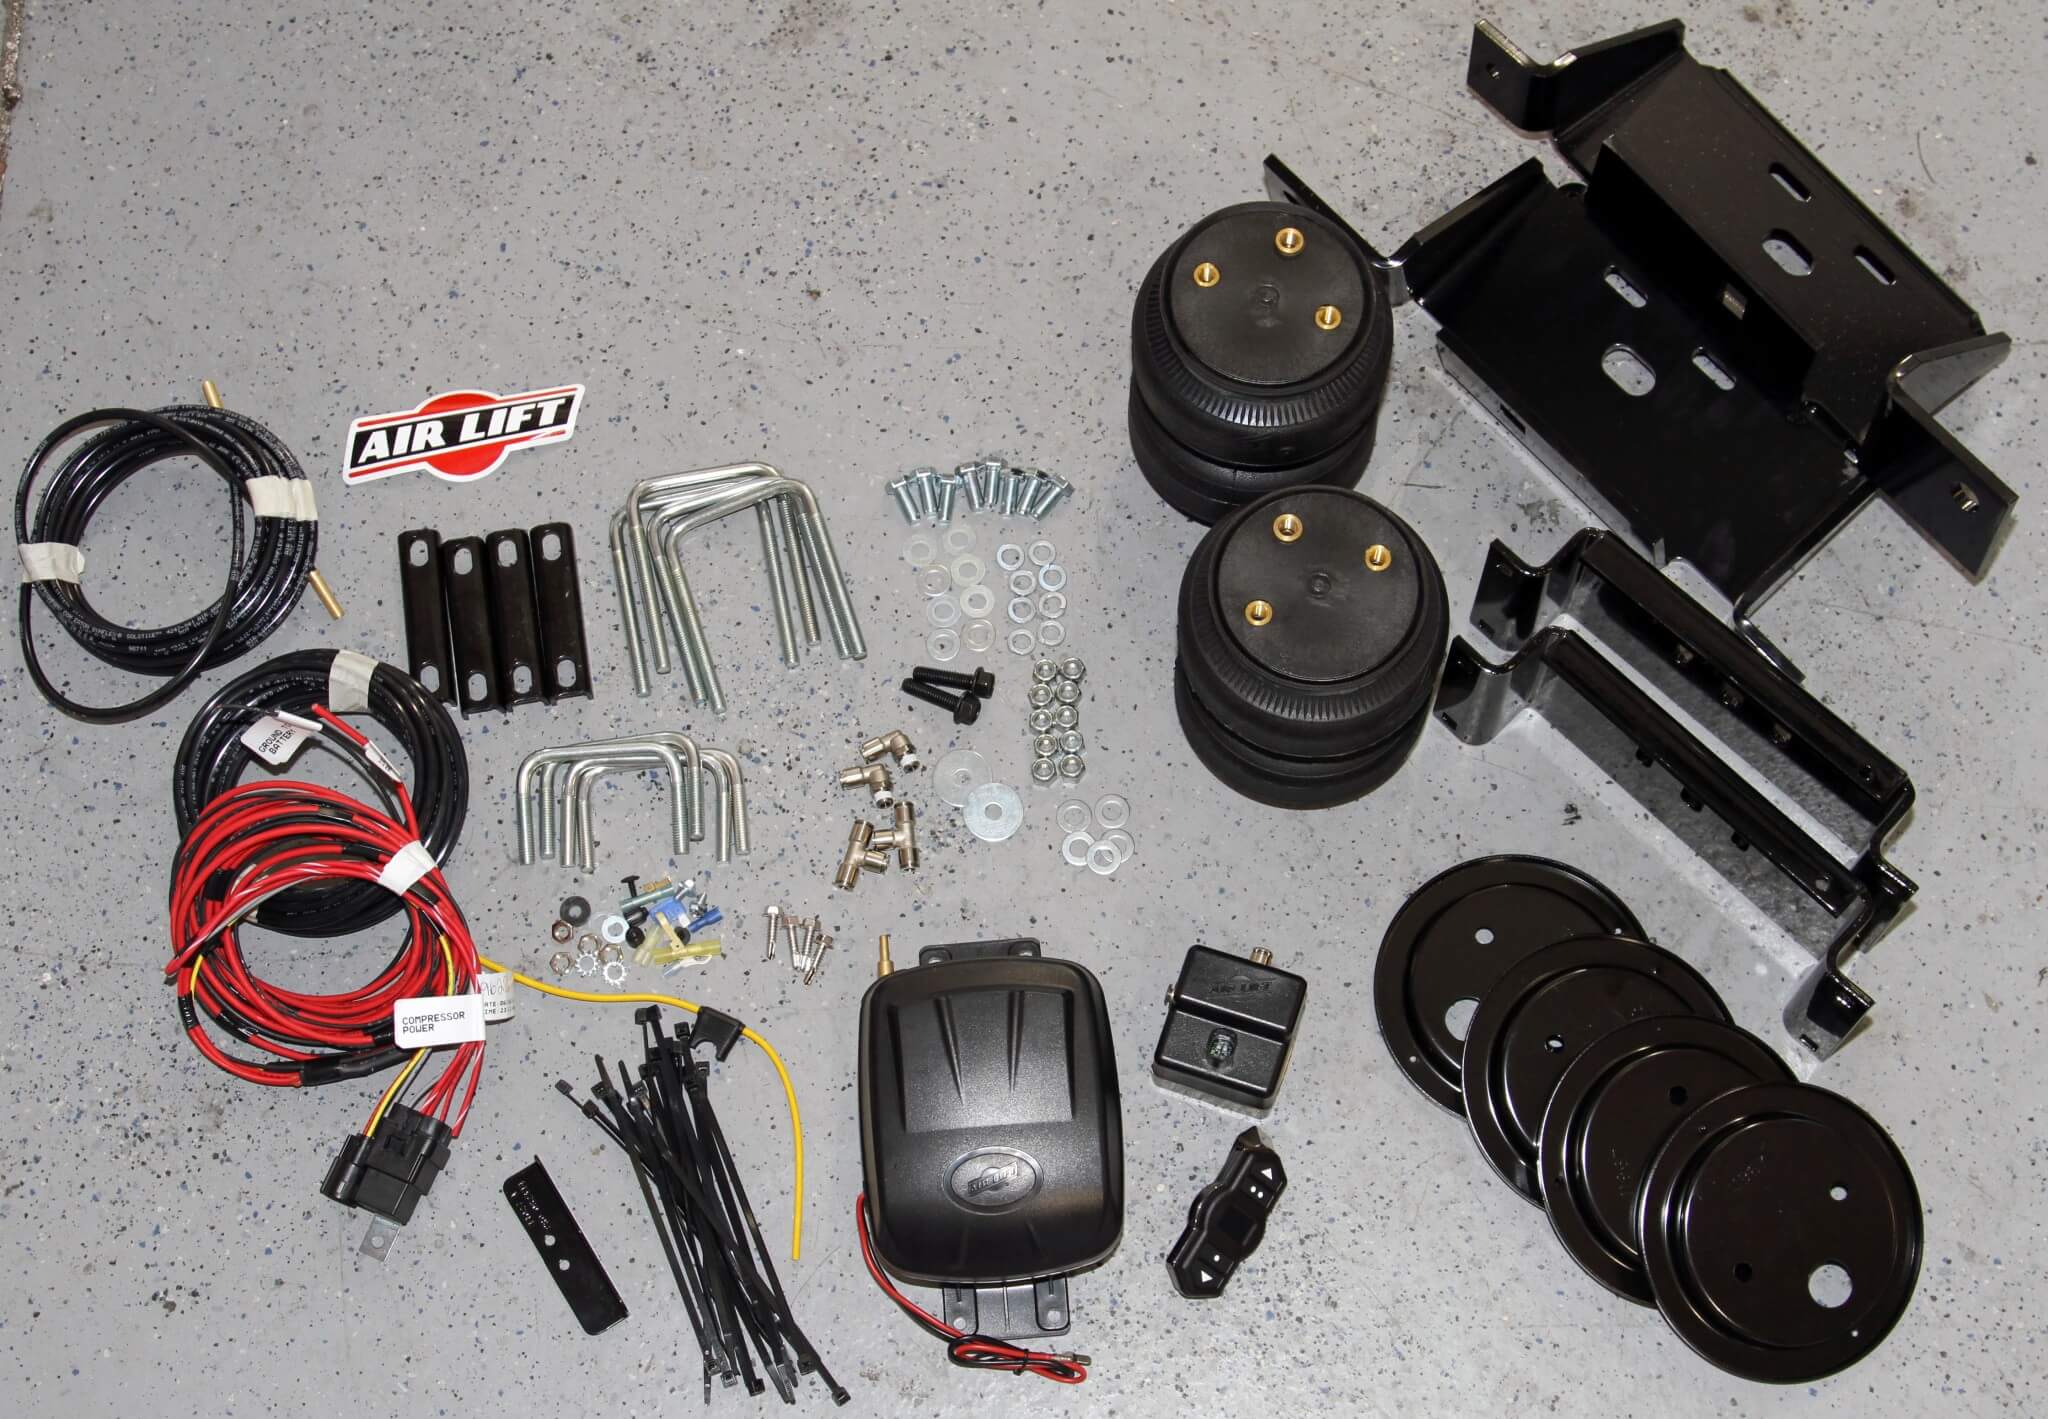 1. Here you see the combined the Air Lift LoadLifter 5000 Ultimate air spring kit and WirelessOne compressor system. This package comes with everything needed to add remote load leveling capability to your truck in less than a day.